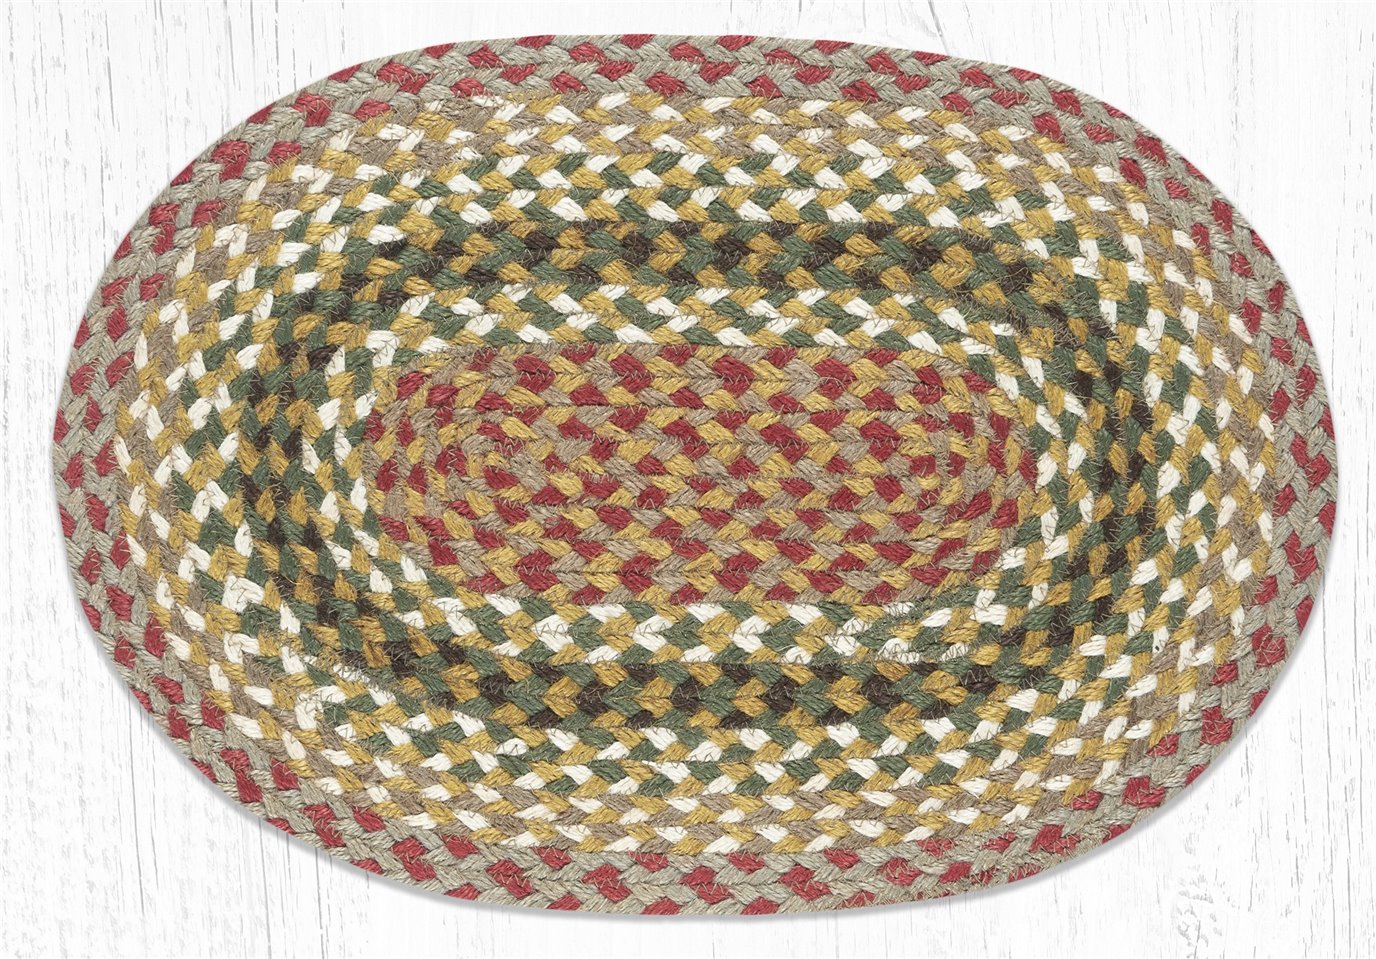 Olive/Burgundy/Gray Jute Braided Placemat 13"x19"